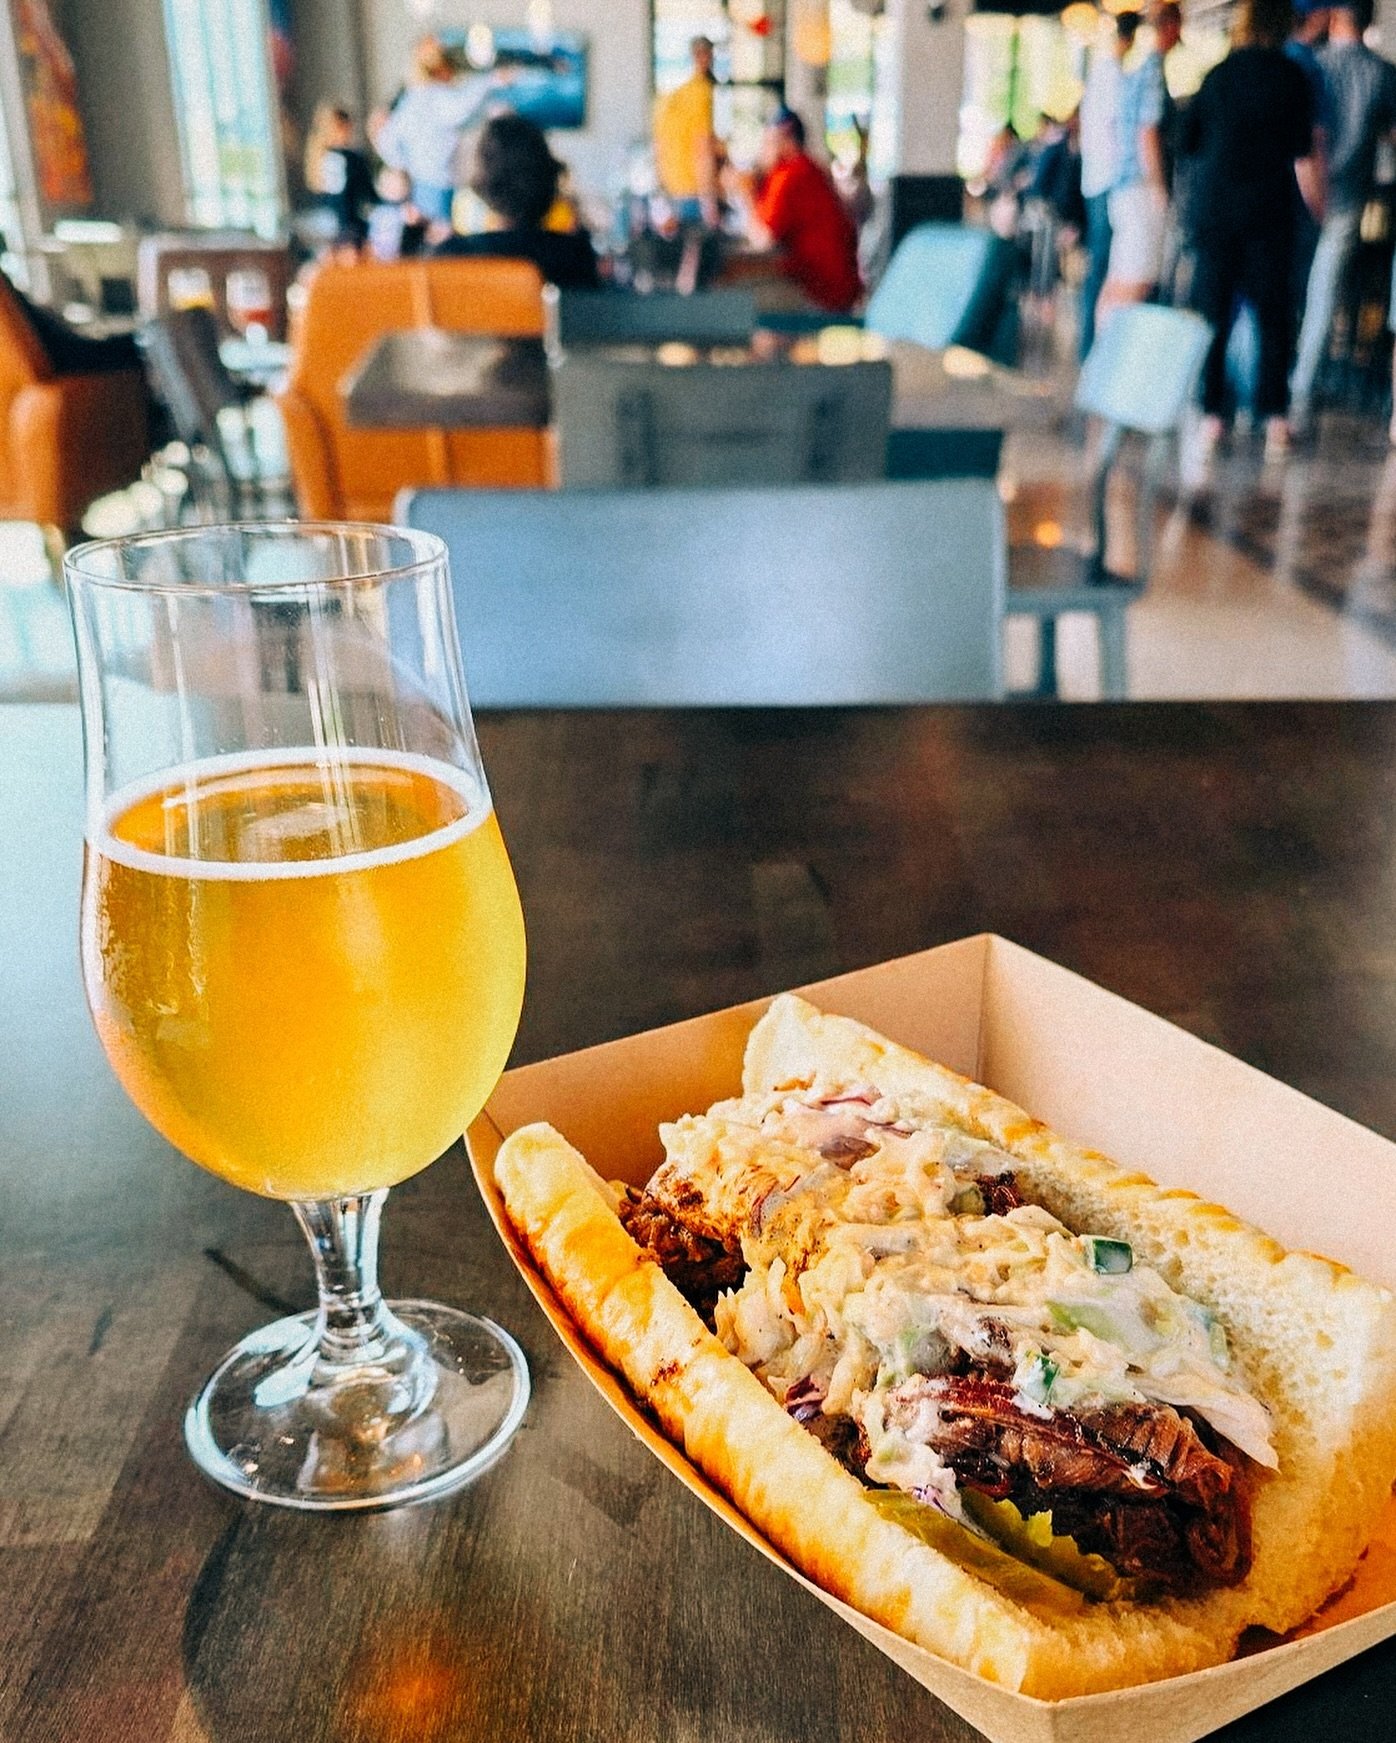 While we work on opening up our kitchen, we *love* having some great food trucks around to keep you fed. @carnivore_craigs will be here May 2-5 from 4-8PM and May 9, 11 and 12 from 4-8PM as well 😋

📸: @beerloversofwi

#drinkslowbeer #1840brewing #w